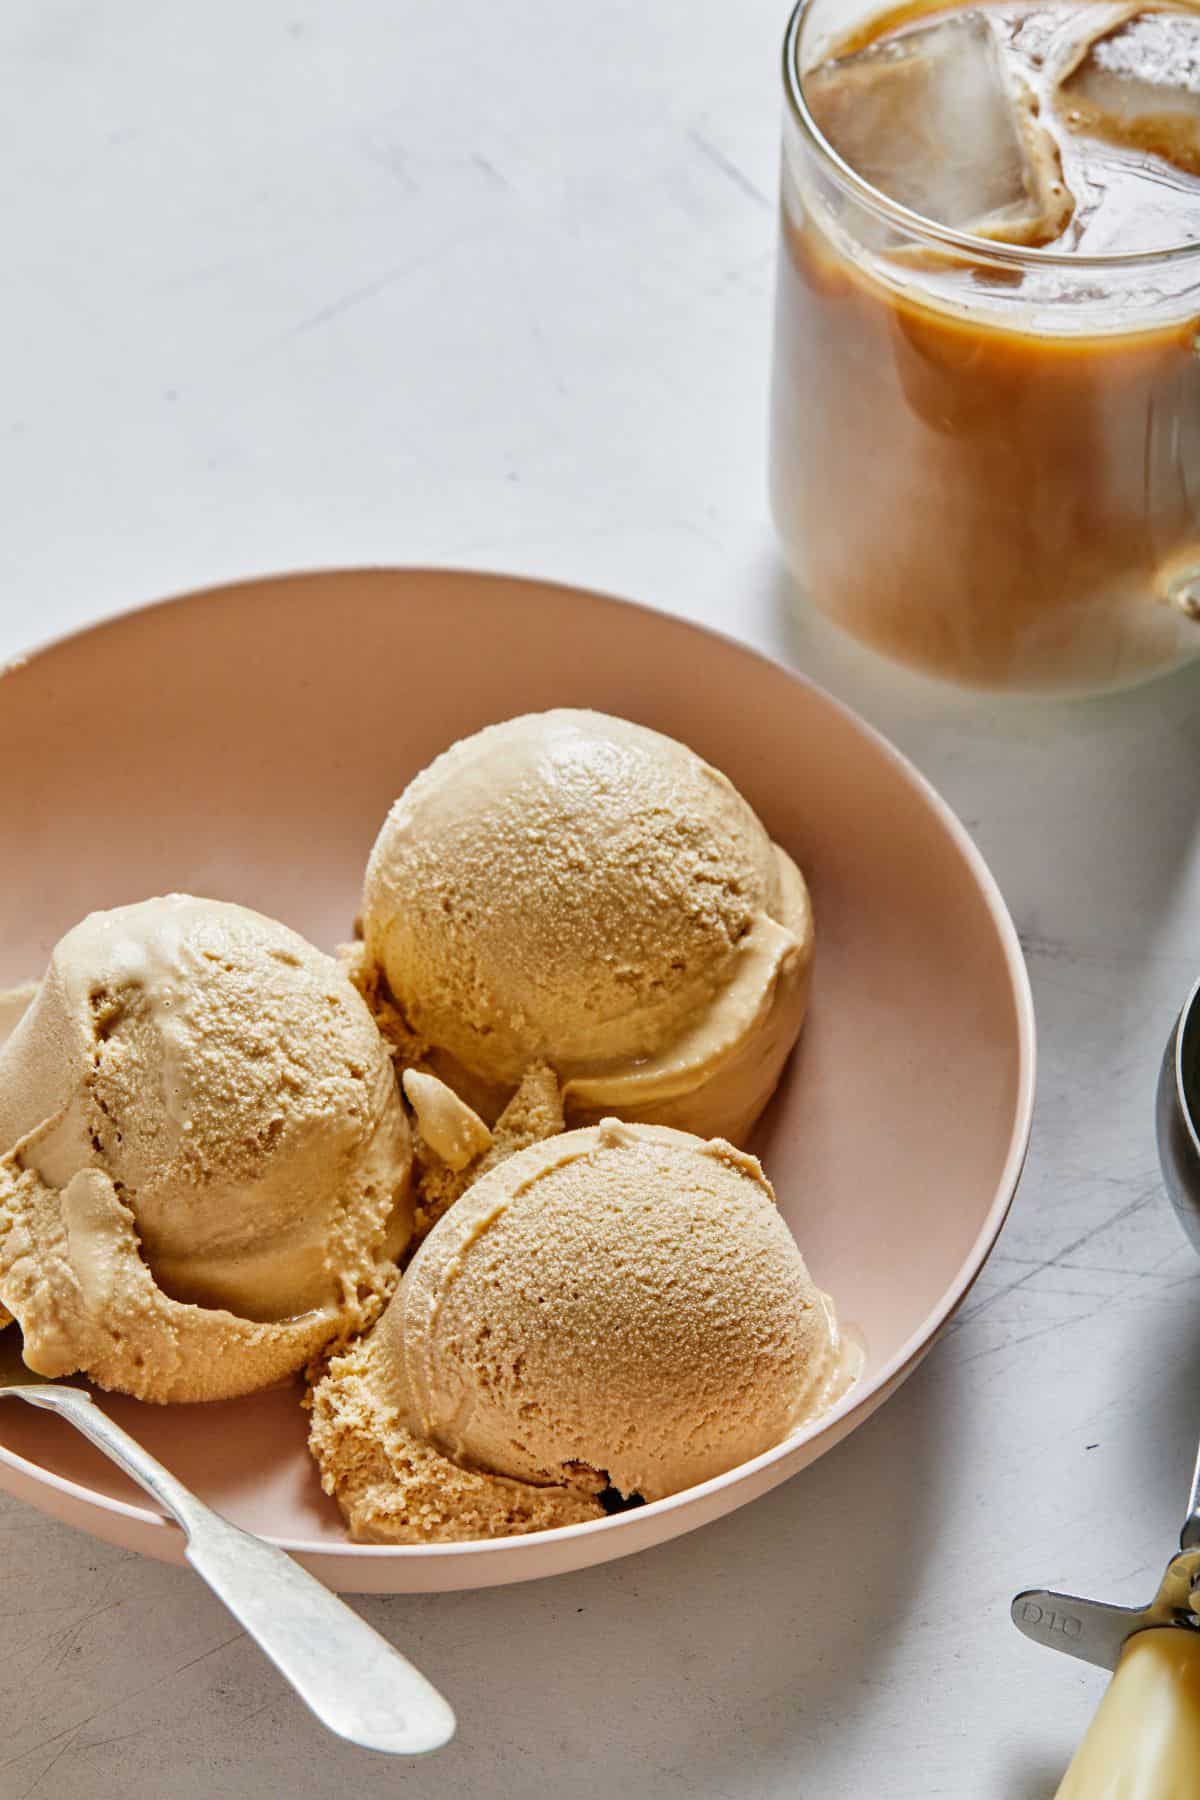 Three scoops of ice cream on top of a plate with a spoon and a glass of coffee beside it